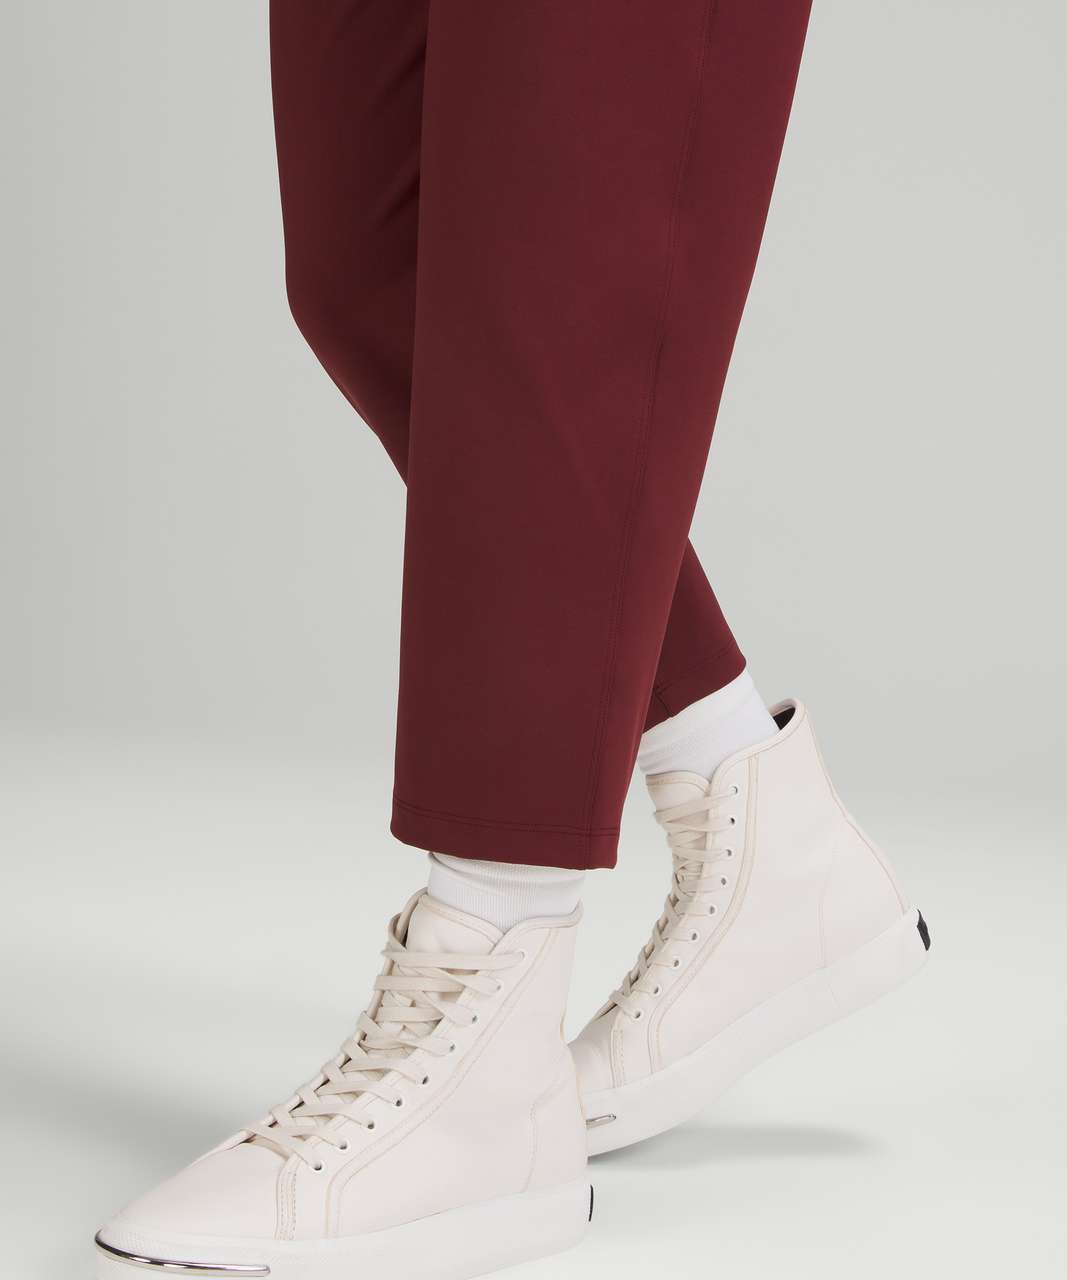 YogaSix - New lululemon]] just dropped! 🤩 This Red Merlot color